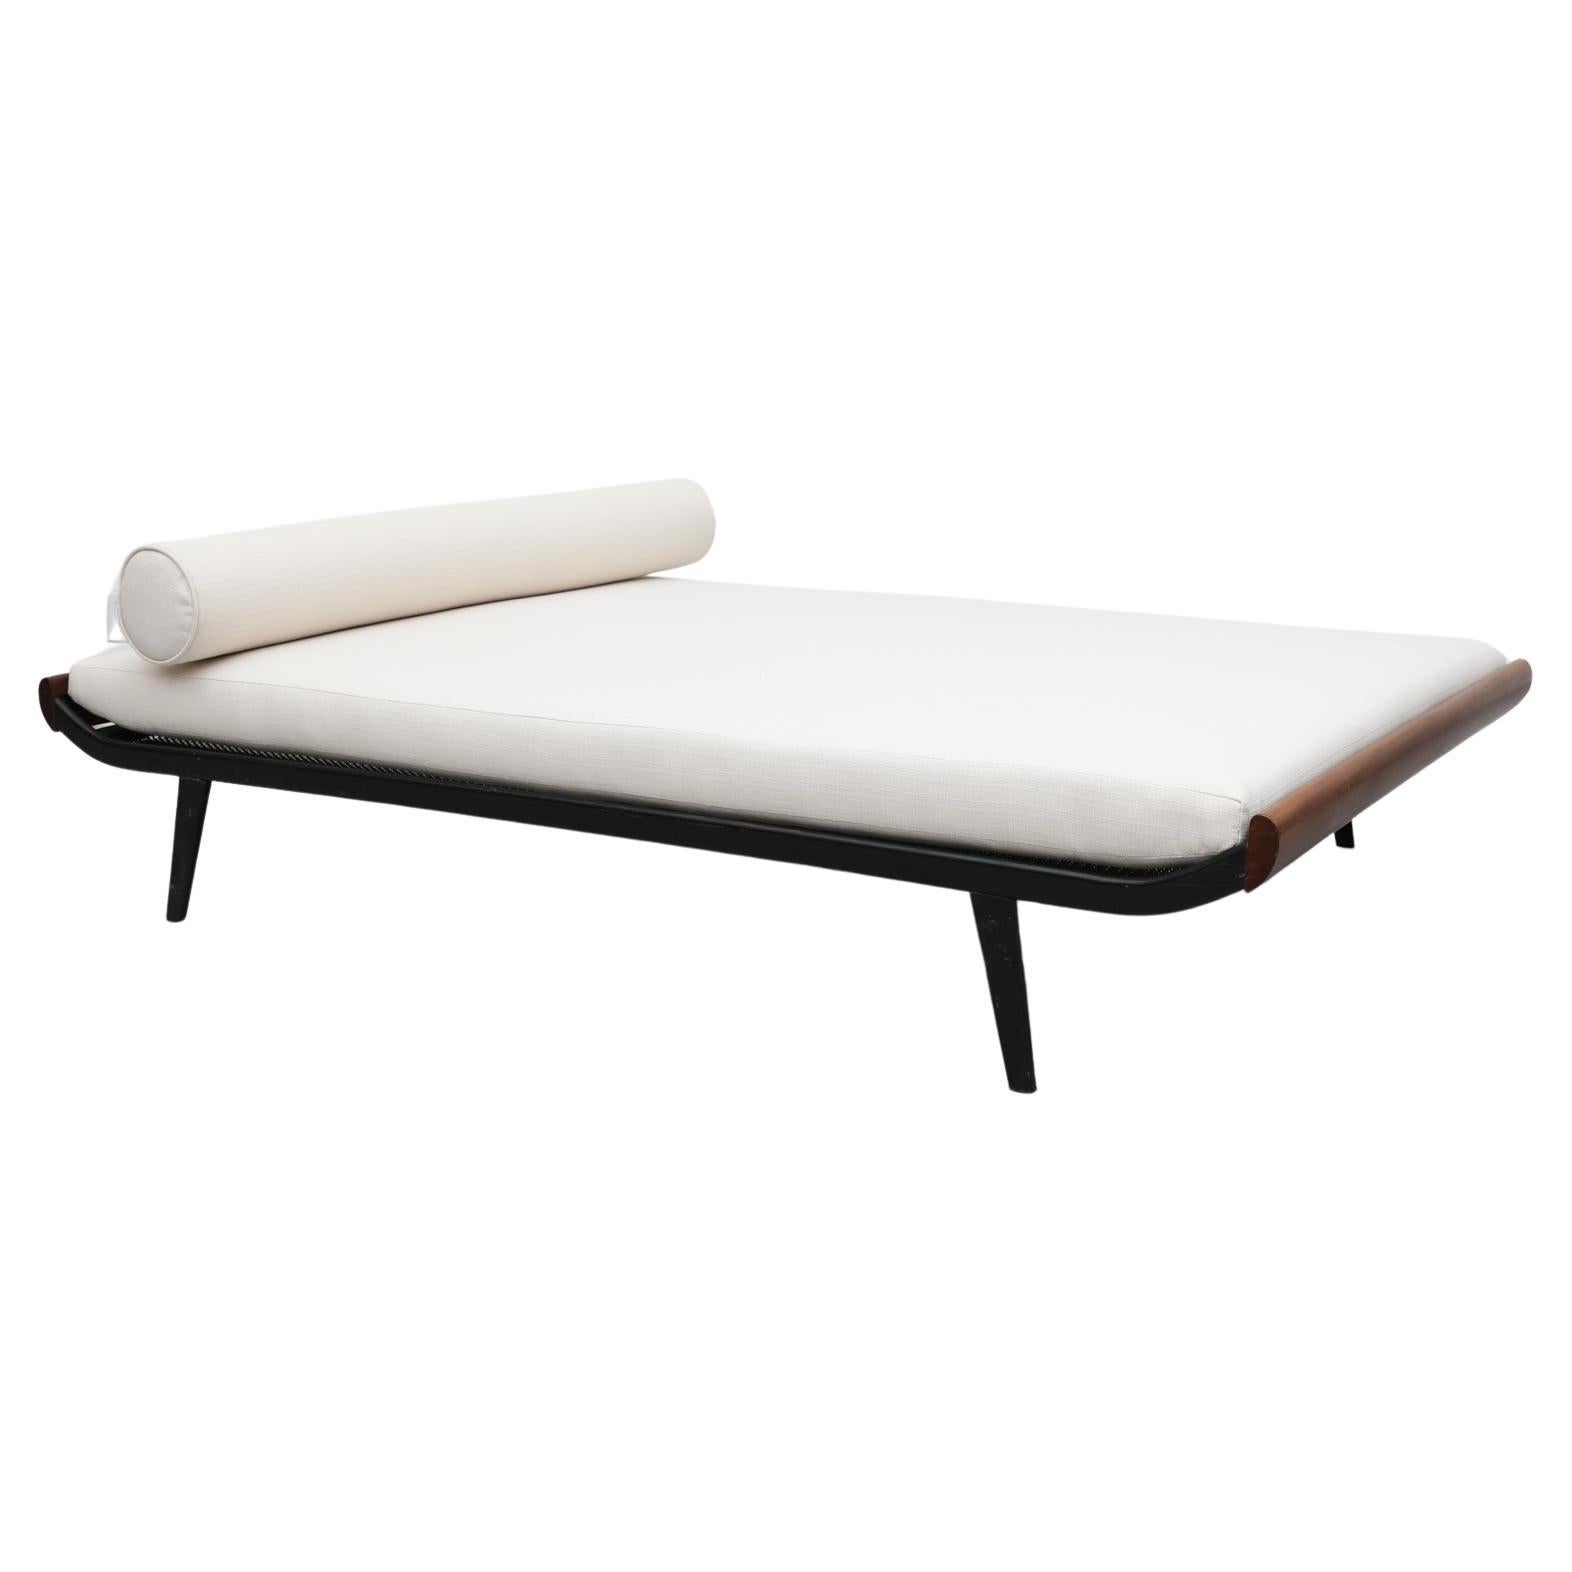 XL "Cleopatra" Daybed by A.R. Cordemeyer for Auping with Teak and Grey Steel Fra